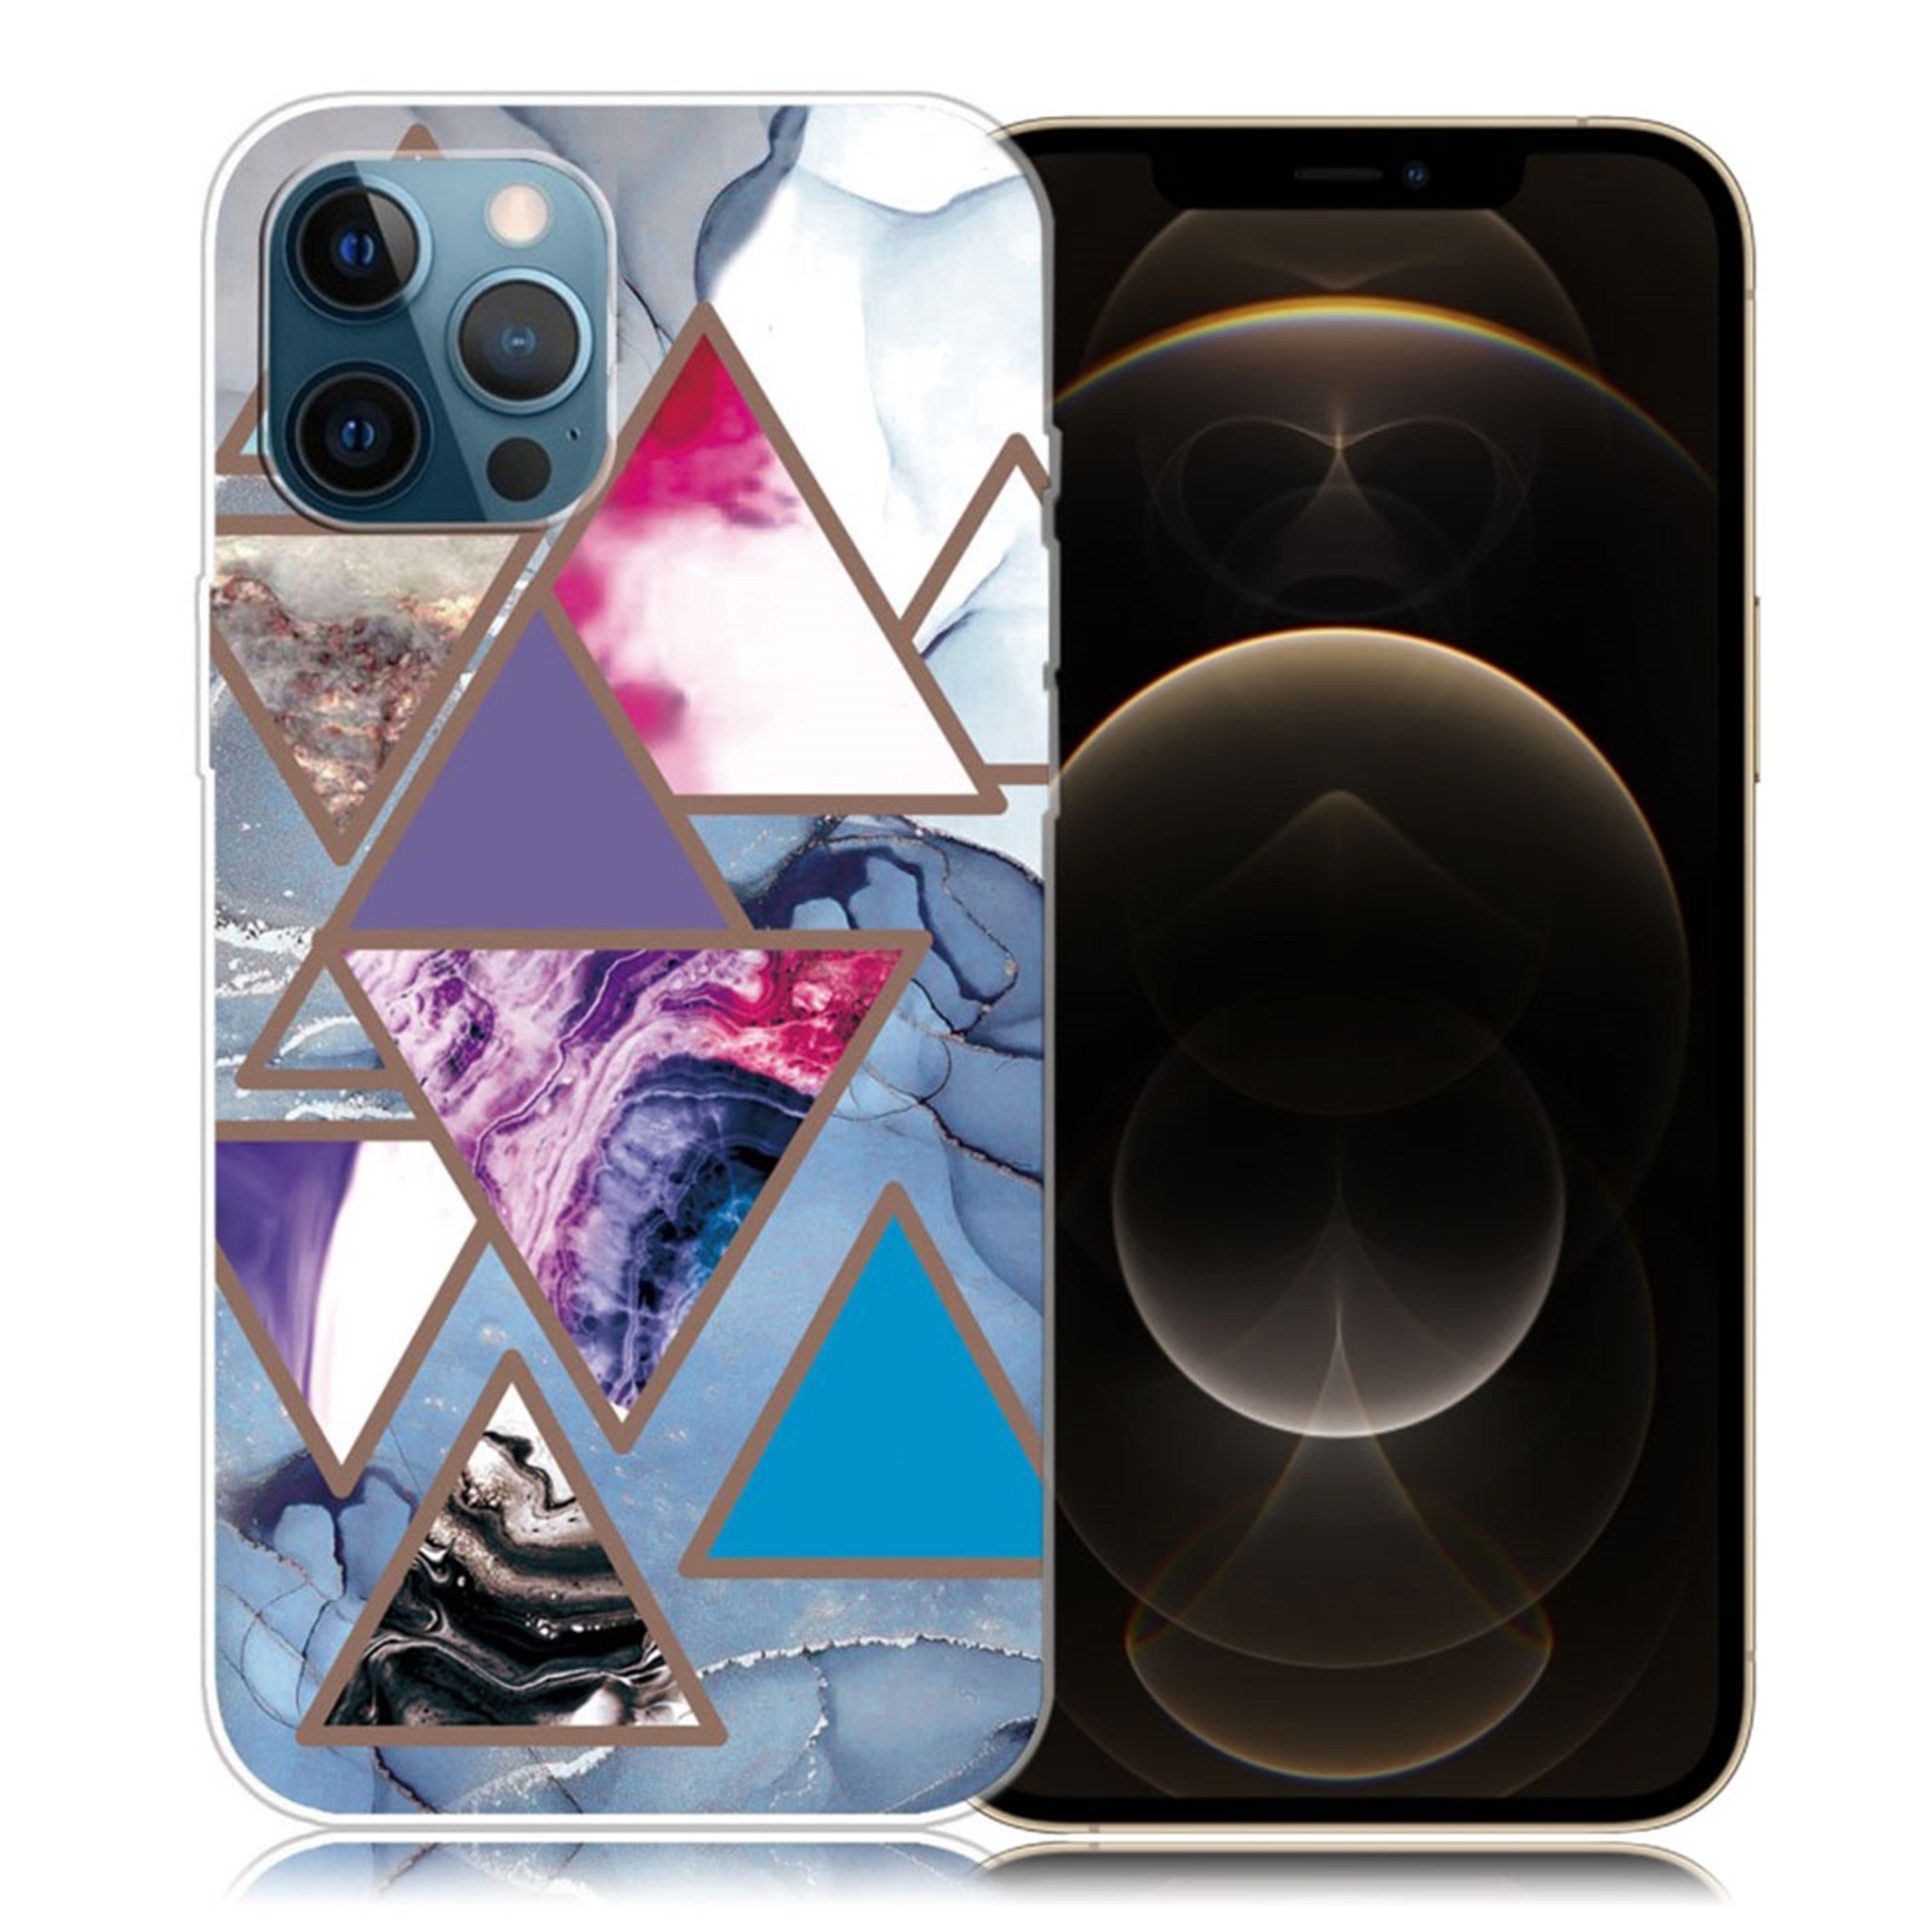 Marble iPhone 12 Pro Max case - Triangle Patterns in Marble